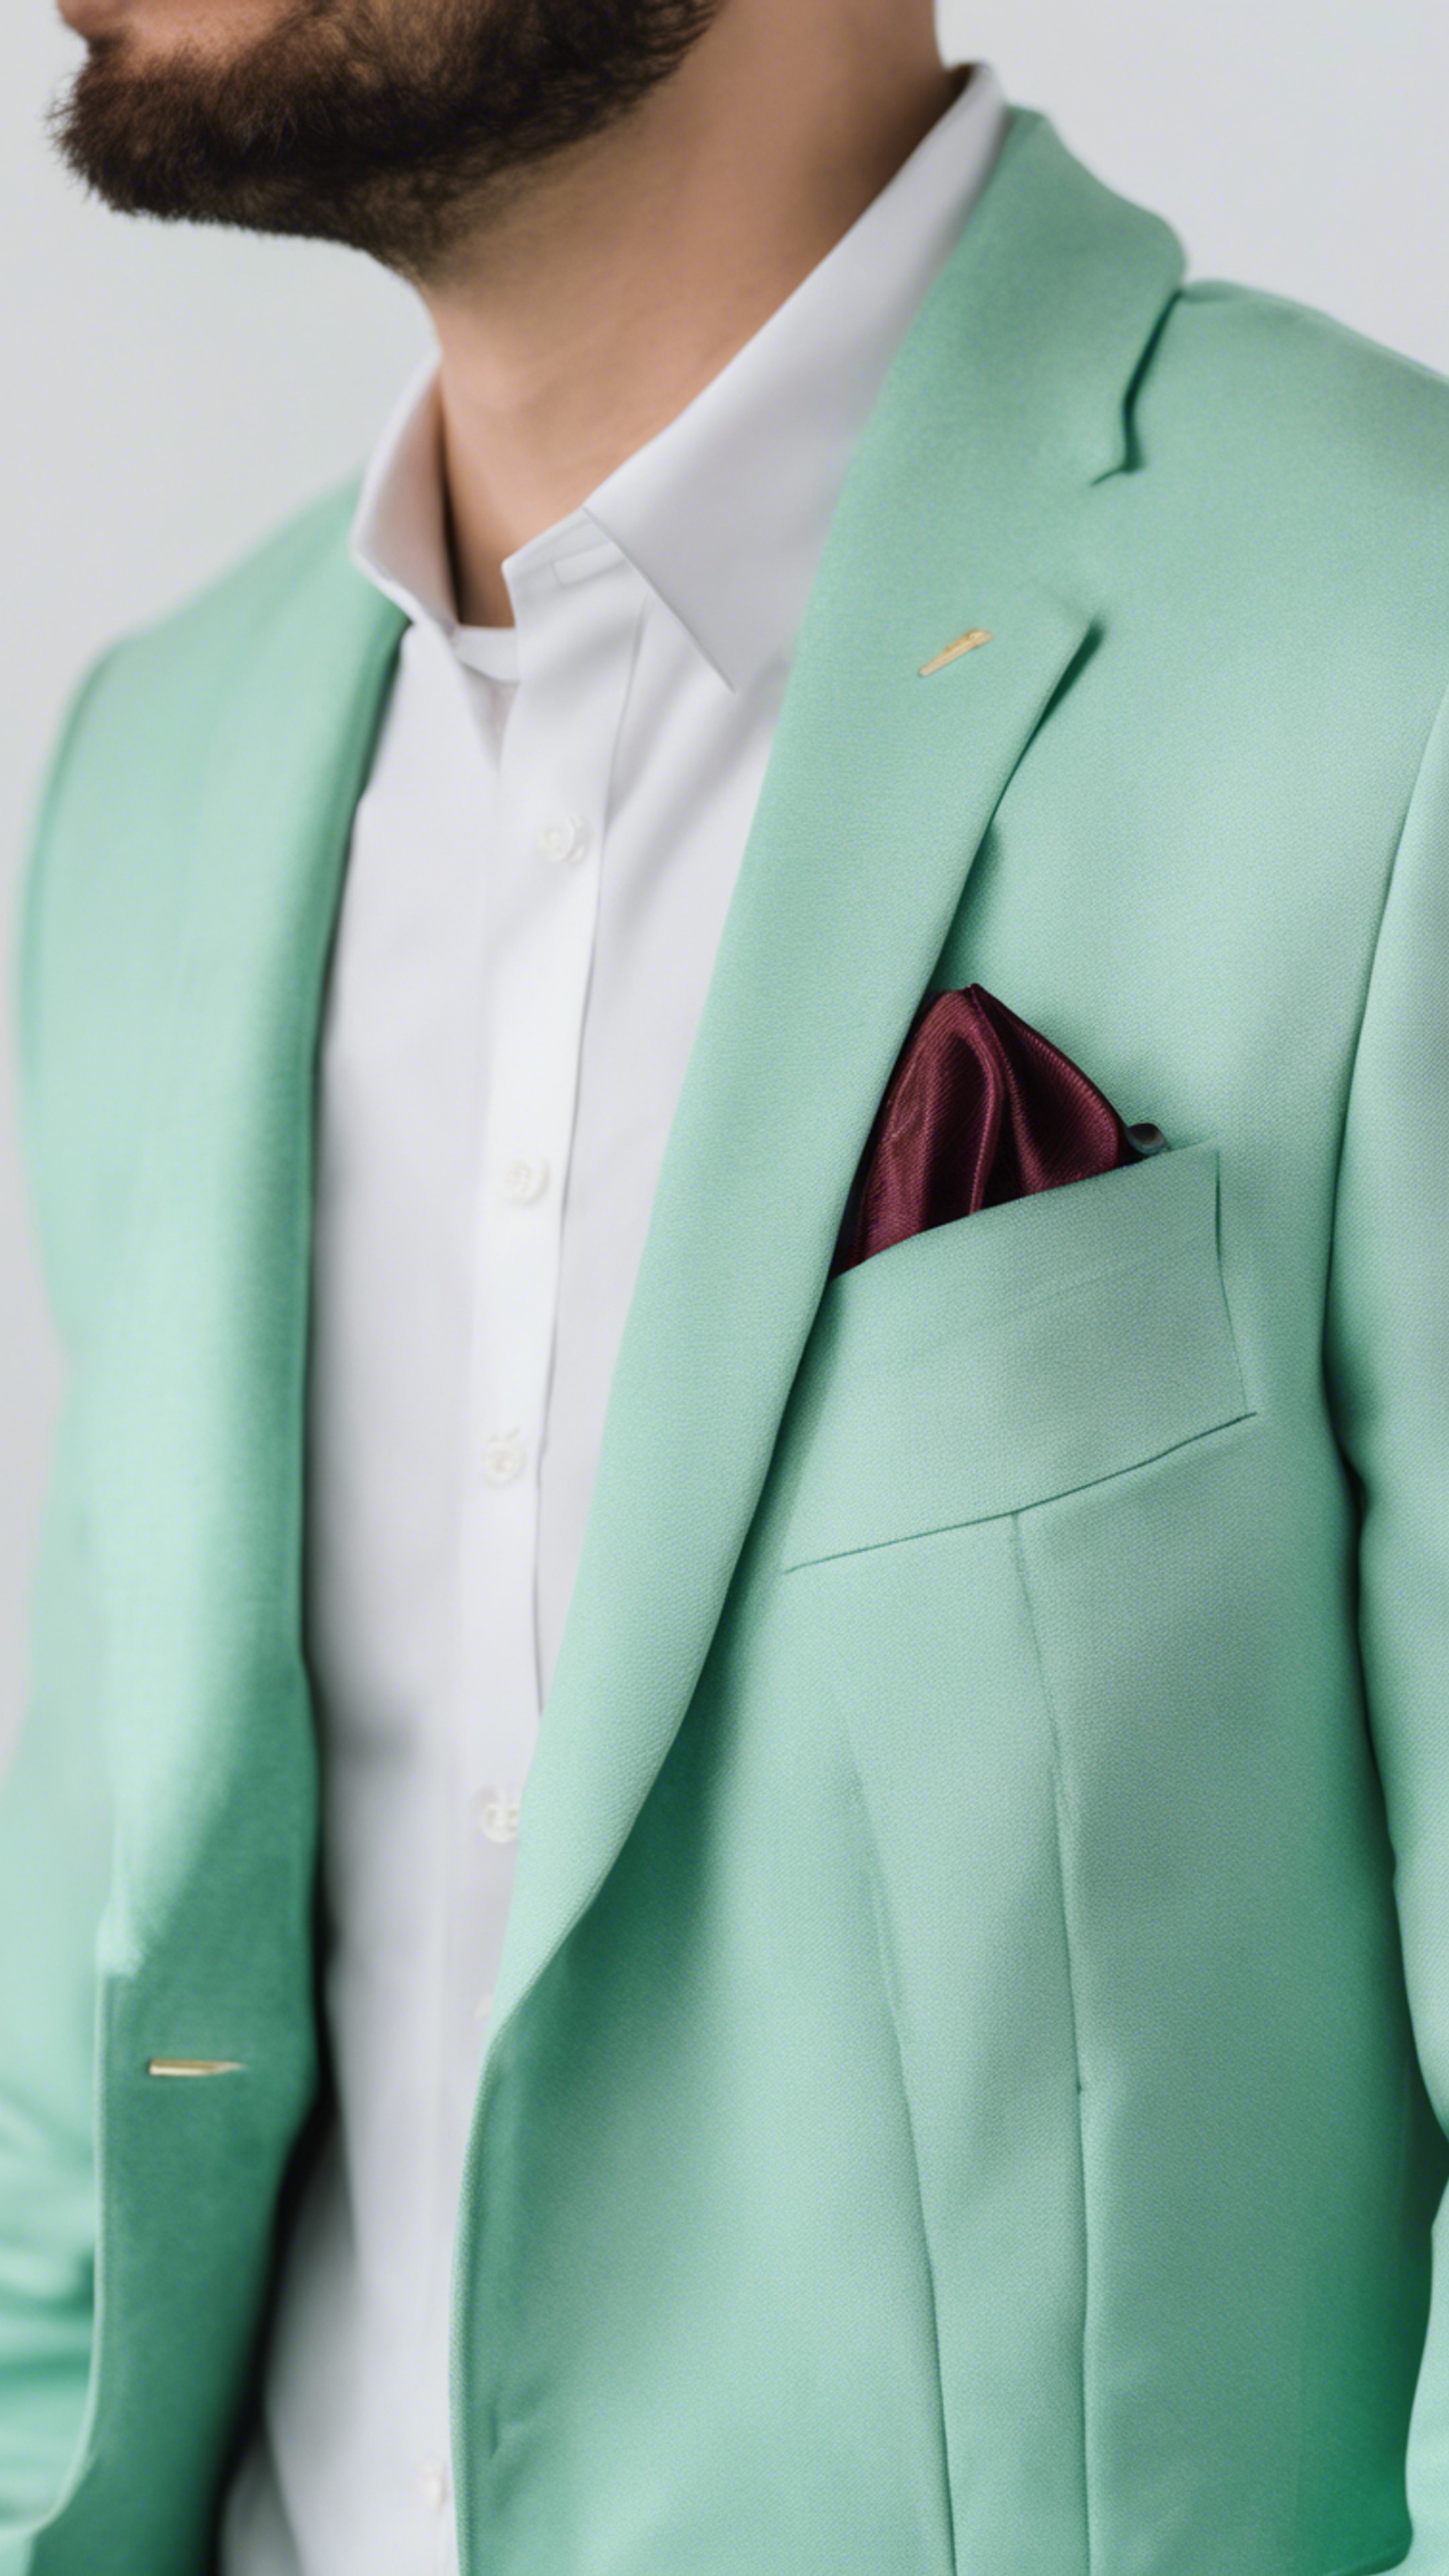 A stunning mint green preppy style blazer hanging against a white background.壁紙[3731070bd3ce4d88a3e1]